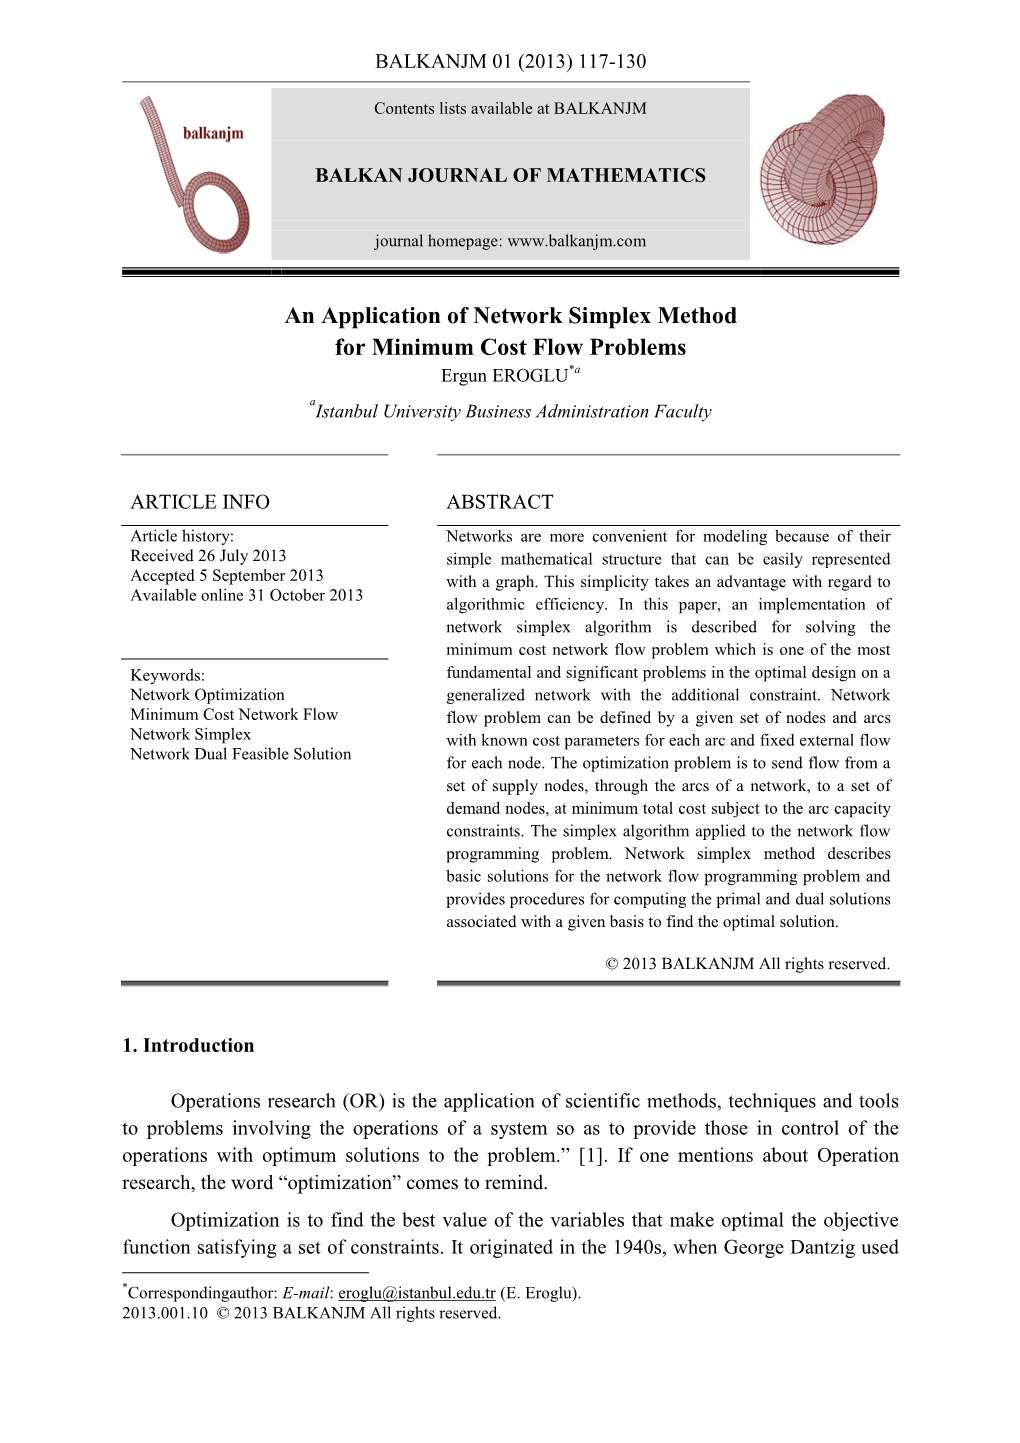 An Application of Network Simplex Method for Minimum Cost Flow Problems Ergun EROGLU*A a Istanbul University Business Administration Faculty